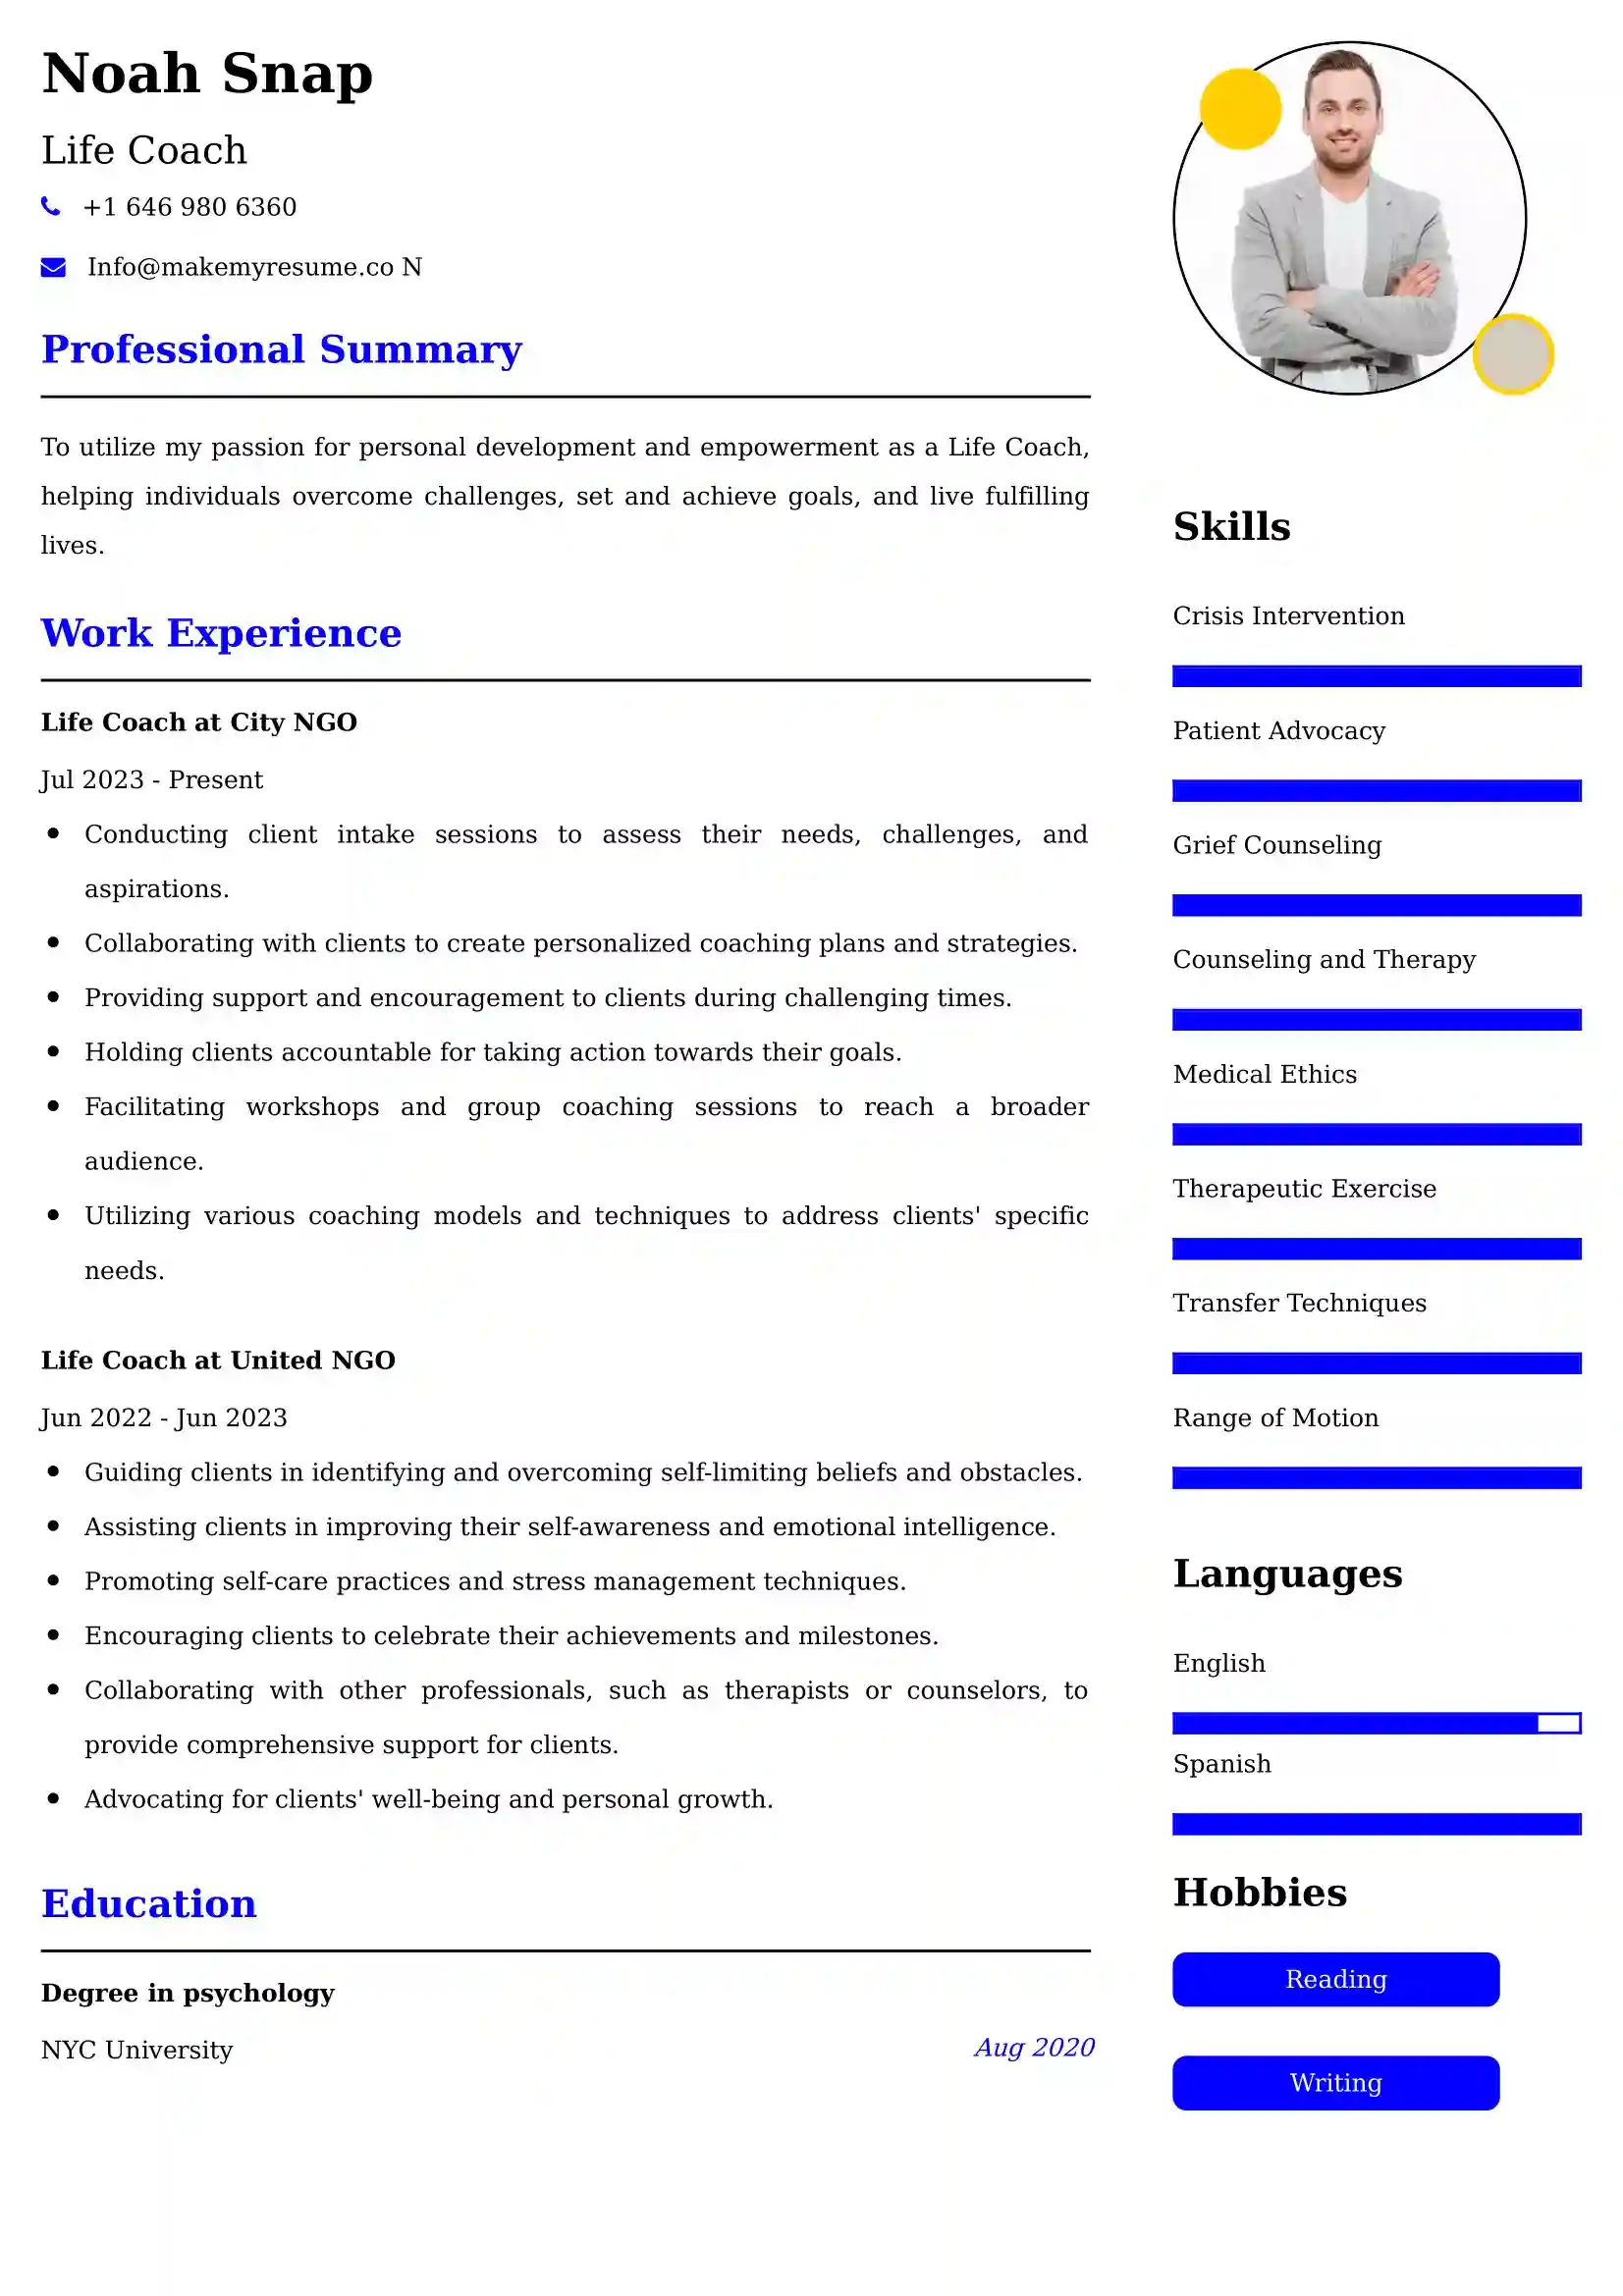 Best Life Coach Resume Examples for UK